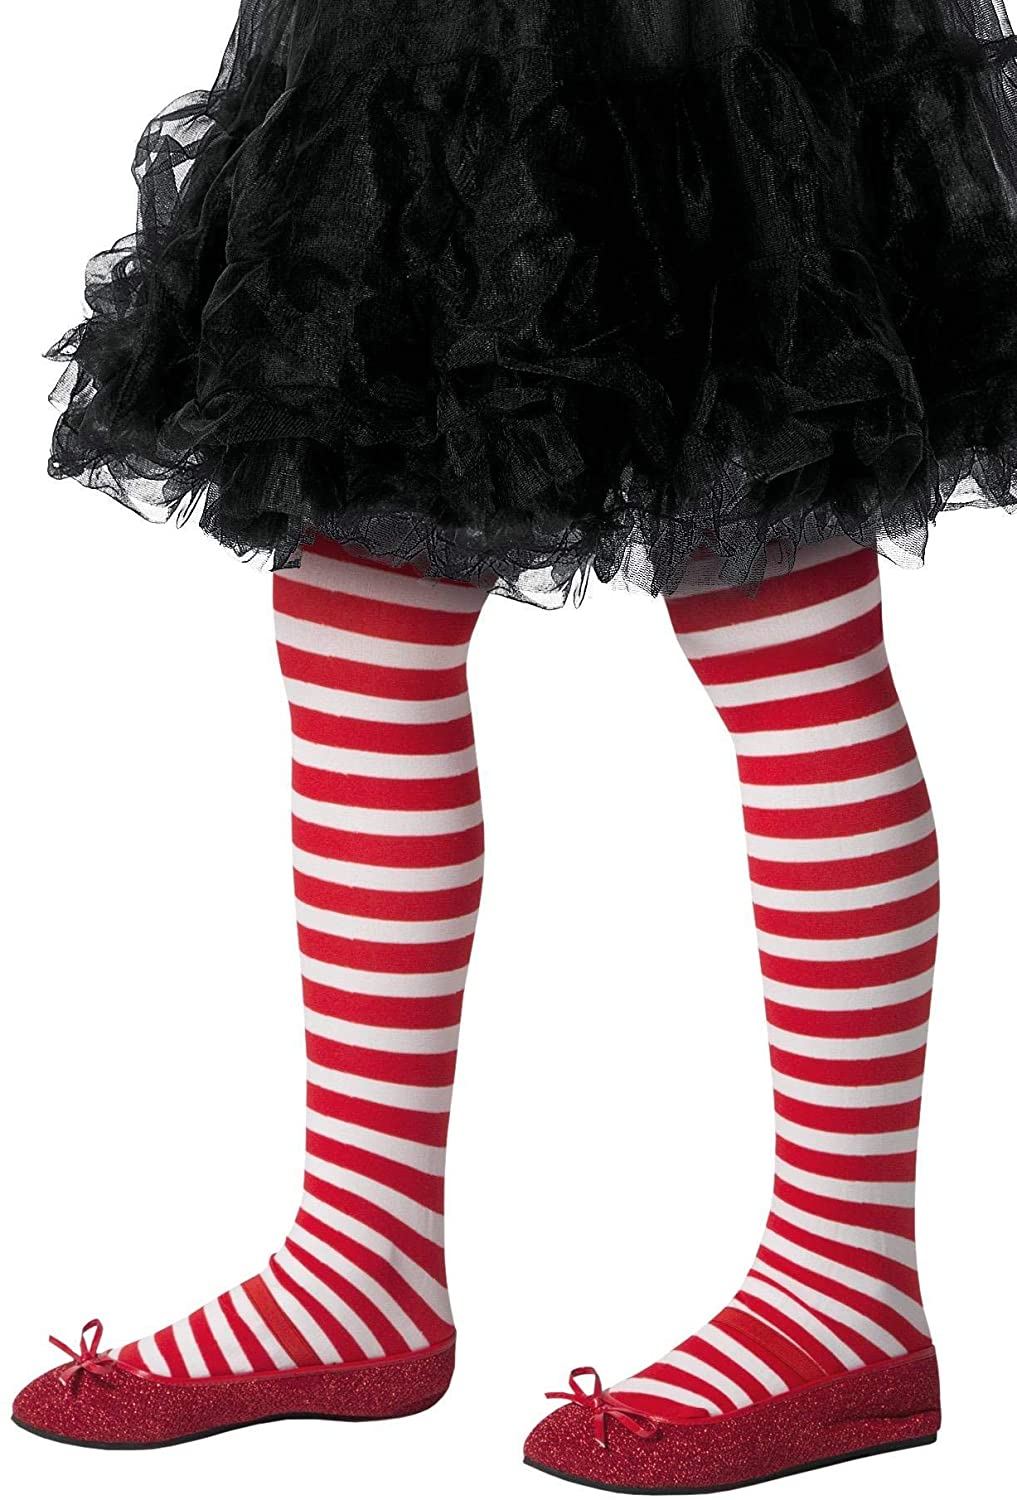 Smiffys 48331 Child's Striped Tights, Red/White, UK 6-12